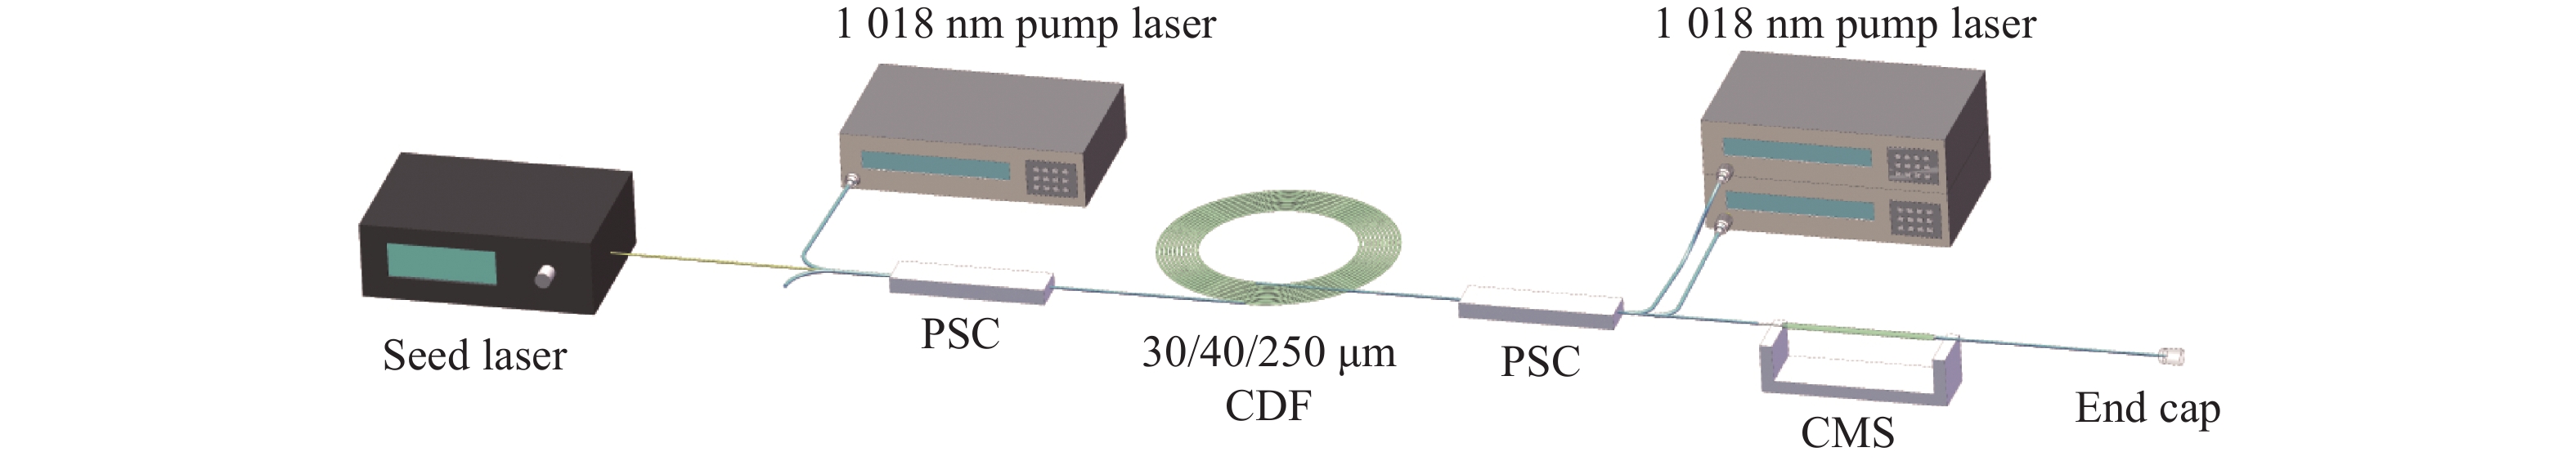 Experimental schematic of the bidirectional tandem-pumped confined-doped fiber amplifier